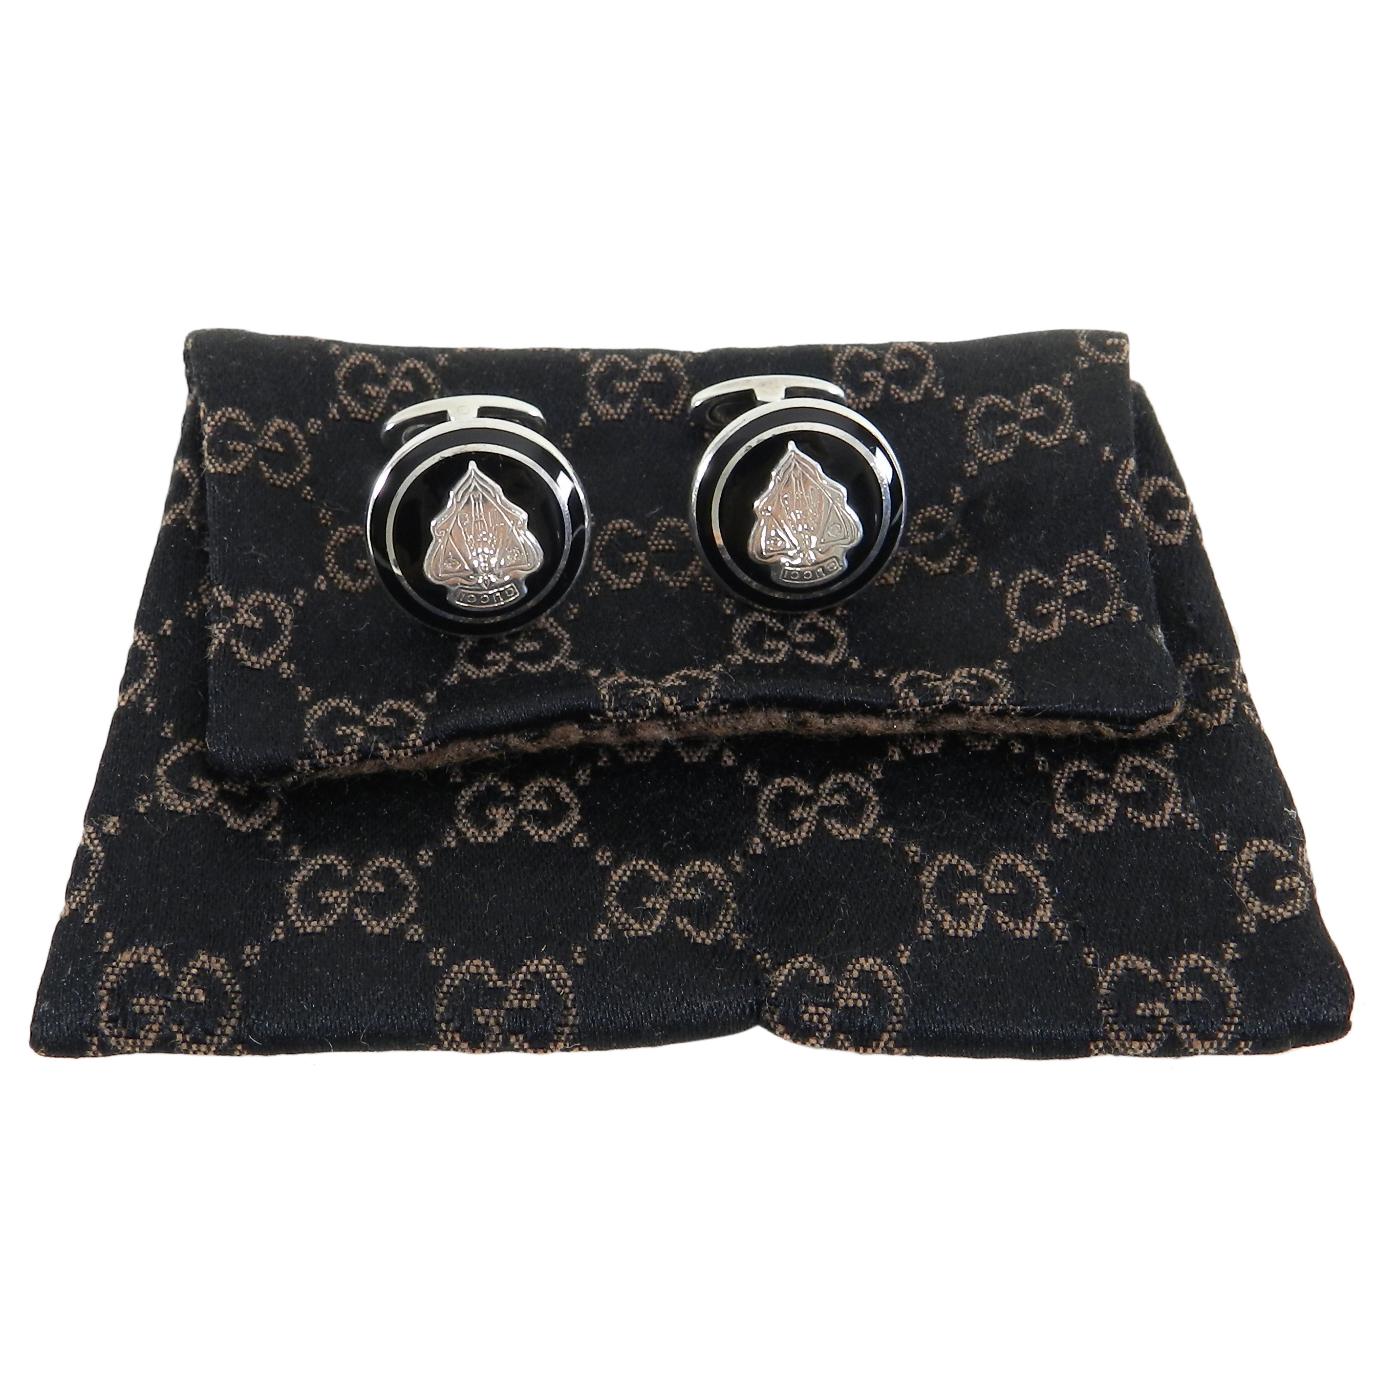 Gucci Sterling Silver Black Enamel Crest Cufflinks.  Round design with Gucci logo crest and black enamel. Fully hallmarked for 925 sterling silver.  Includes pouch.  Measures 0.75